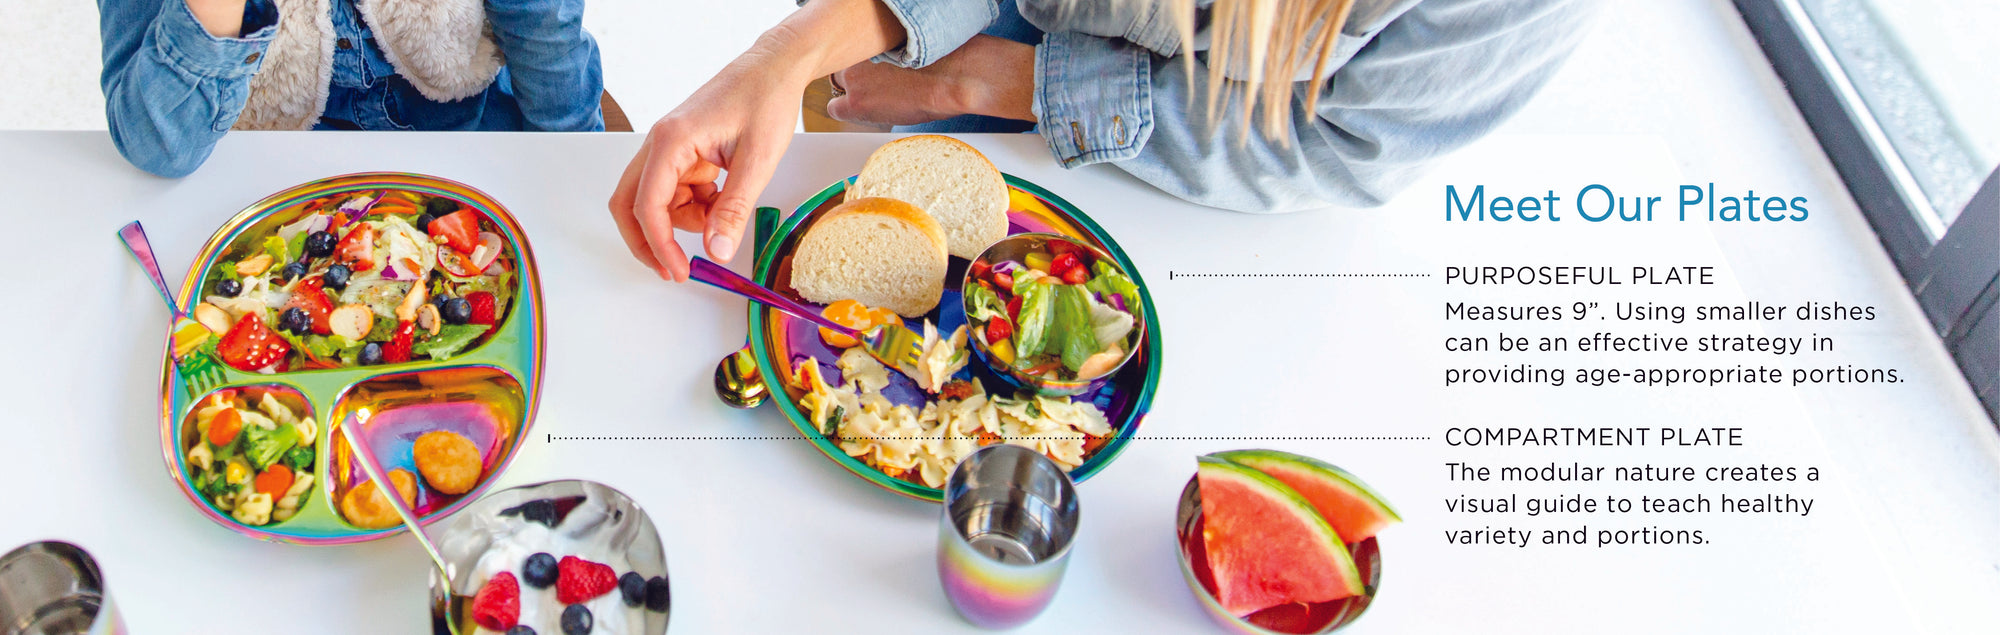 Meet Ahimsa's Plates! Purposeful plates measure 9" - using smaller dishes can be an effective strategy in providing age-appropriate portions. Our compartment plates are modular in nature creating a visual guide to teach healthy variety and portions. 